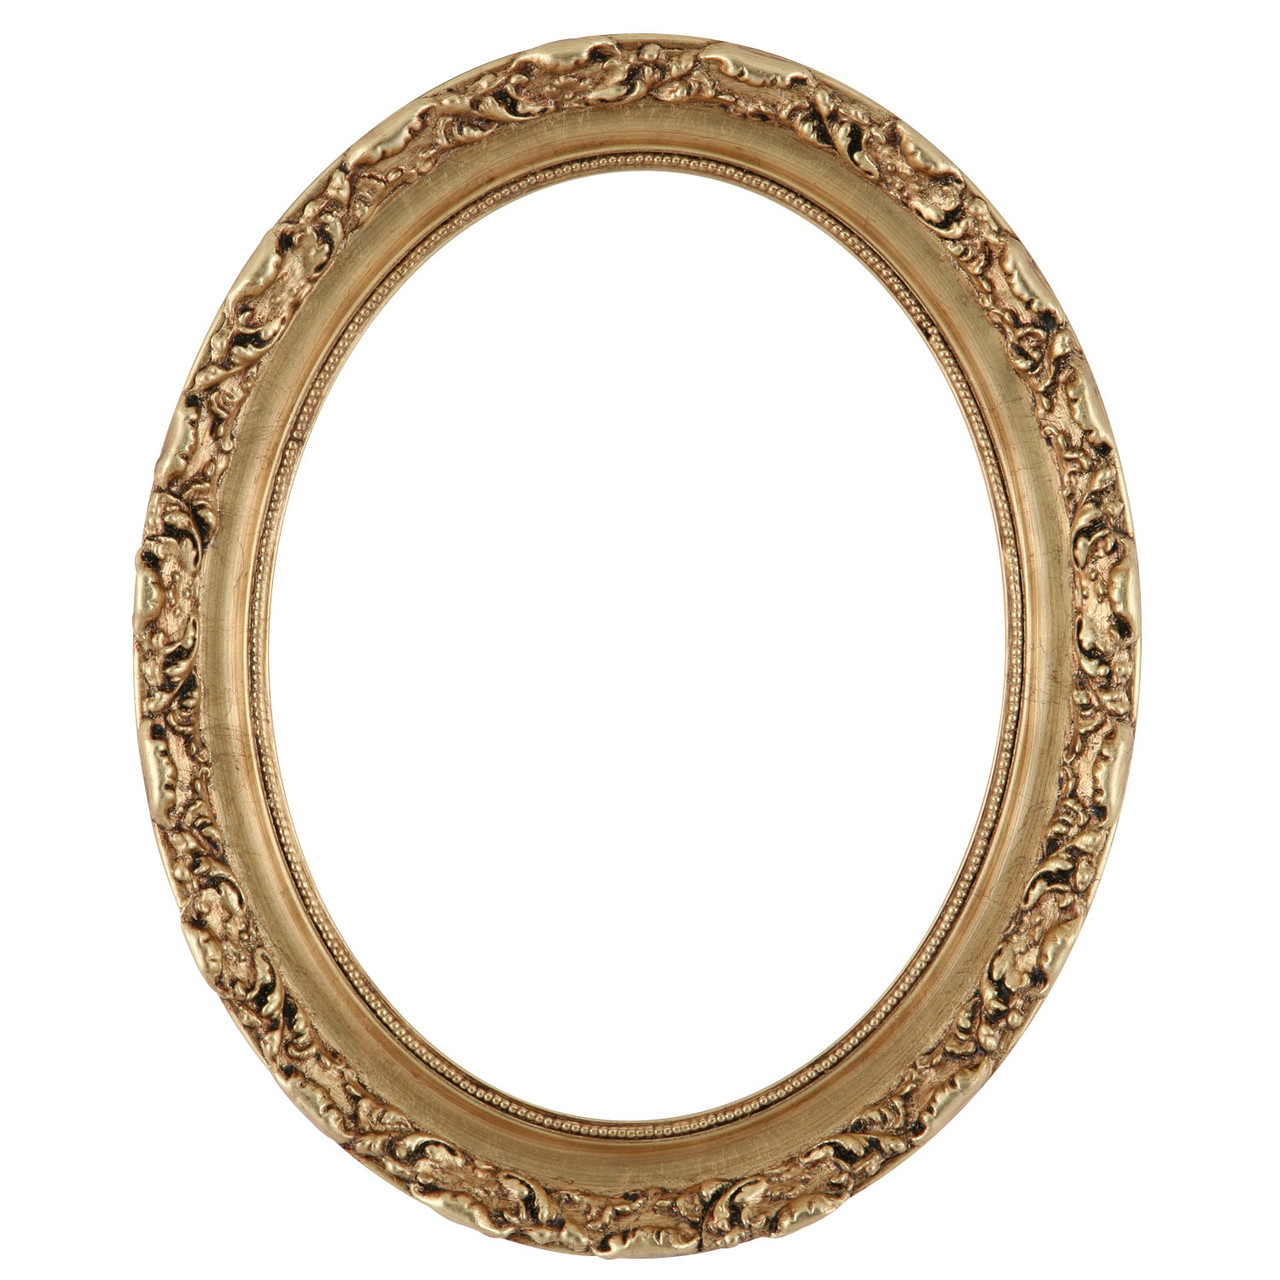 Oval Frame In Gold Leaf Finish Gold Picture Frame With Antique